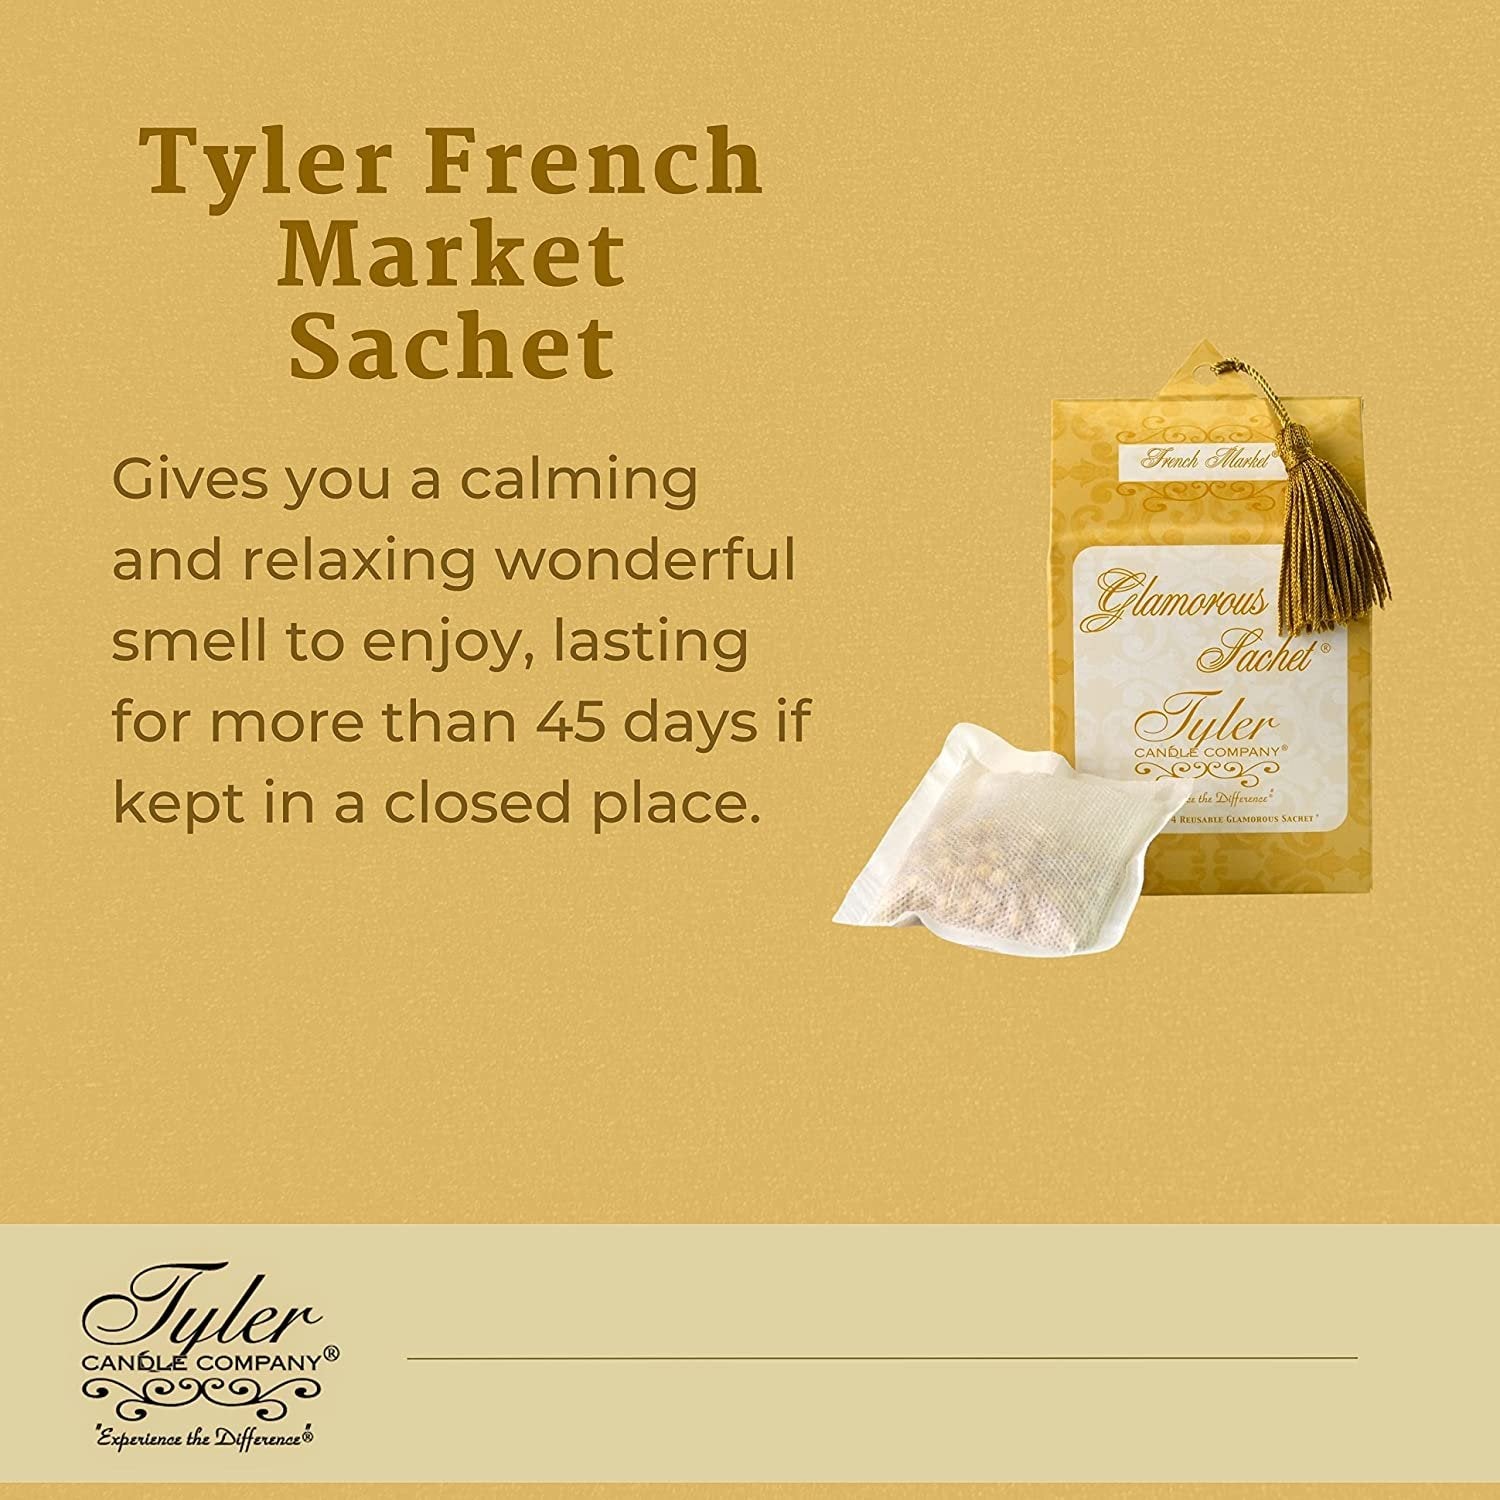 Tyler Candle Company French Market Dryer Sheet Sachets - Glamorous Reusable Dryer Sheets - Sachets for Drawers and Closets - 2 Pack of 4 Sachets, Dryer, Home, or Personal Sachet, with Bonus Key Chain